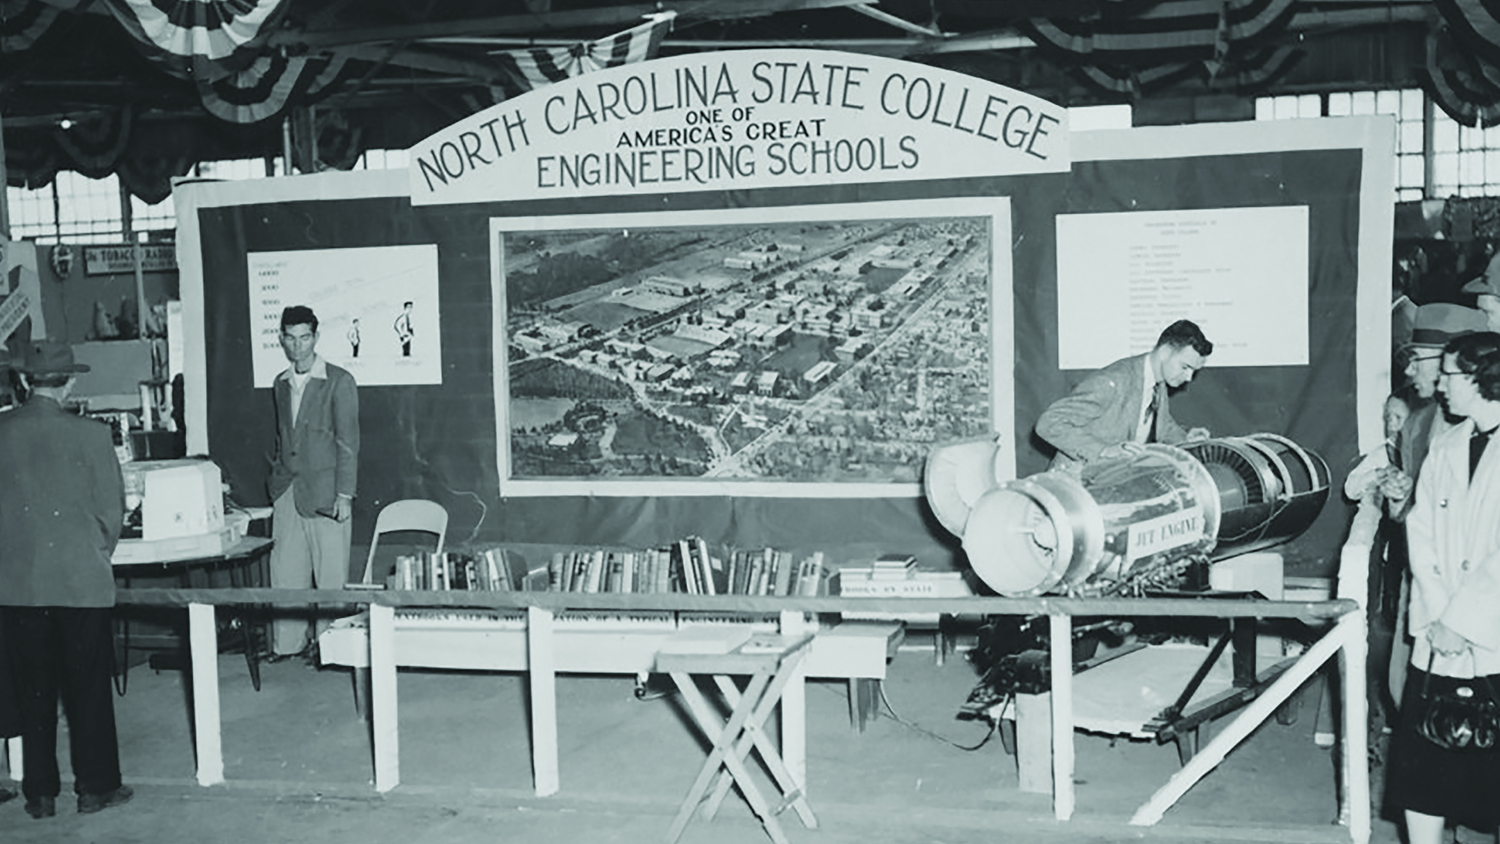 Black and white vintage photo of a College of Engineering booth at the NC State Fair in 1955.